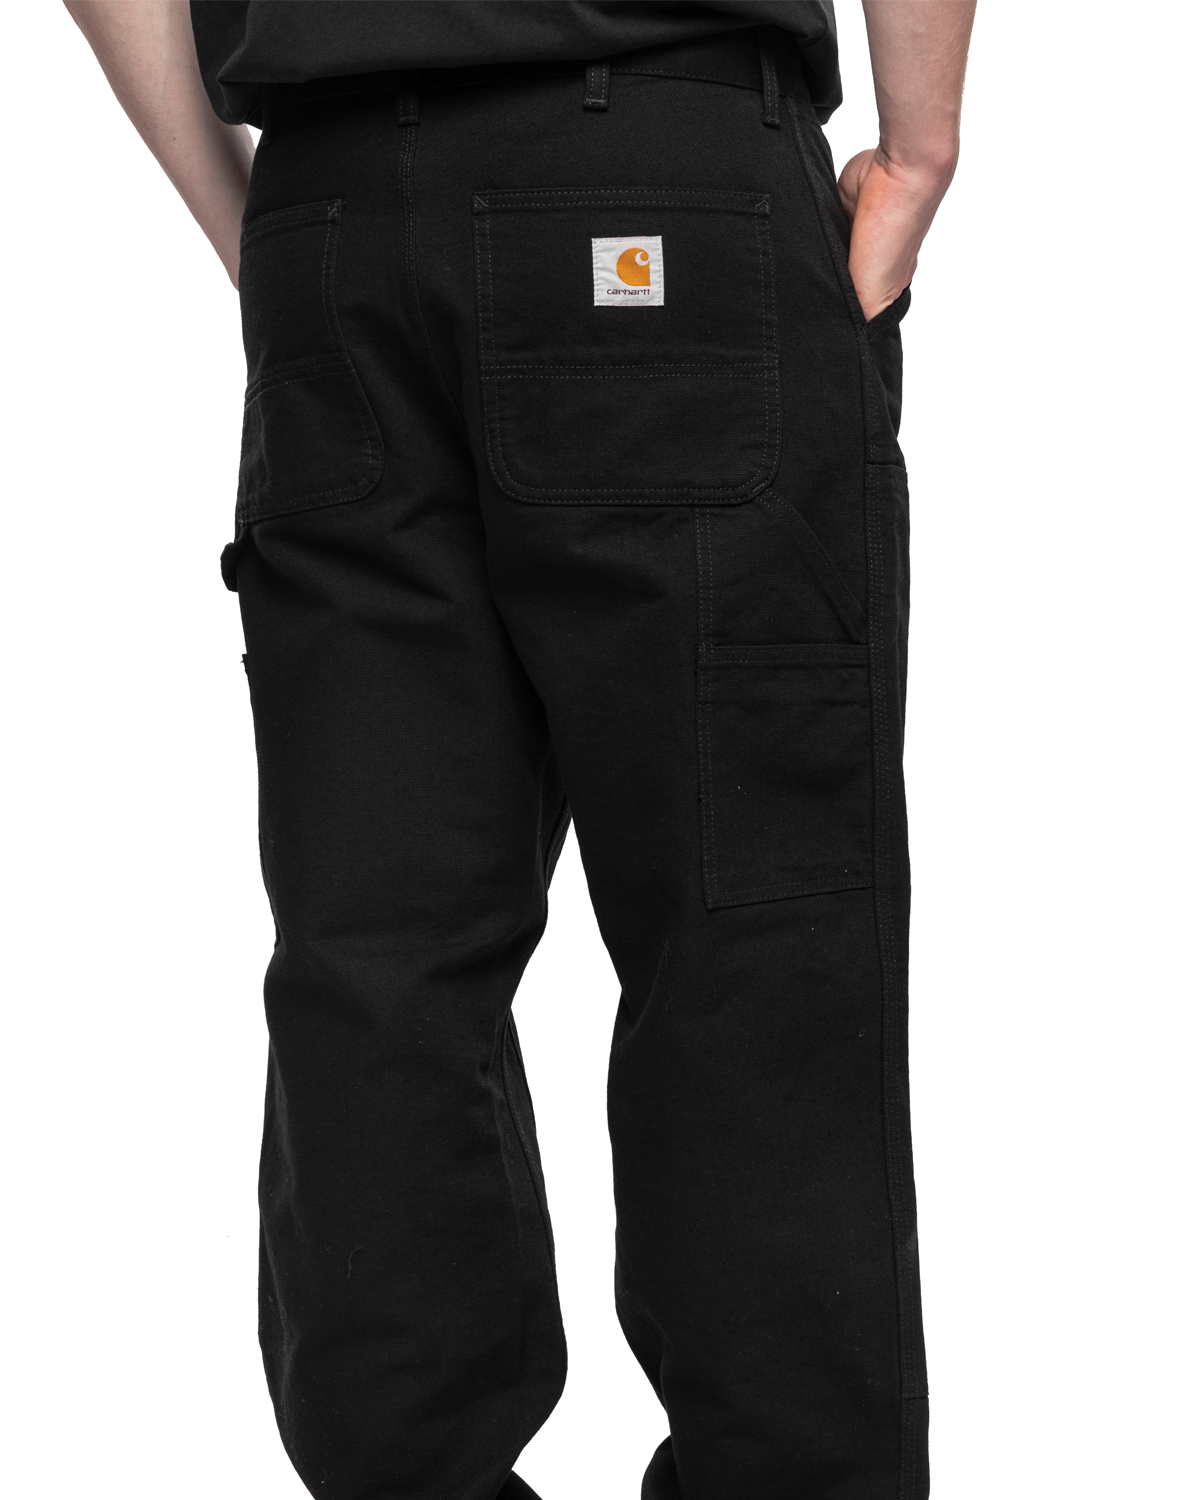 SS24 Double Knee Pant Black (Rinsed)